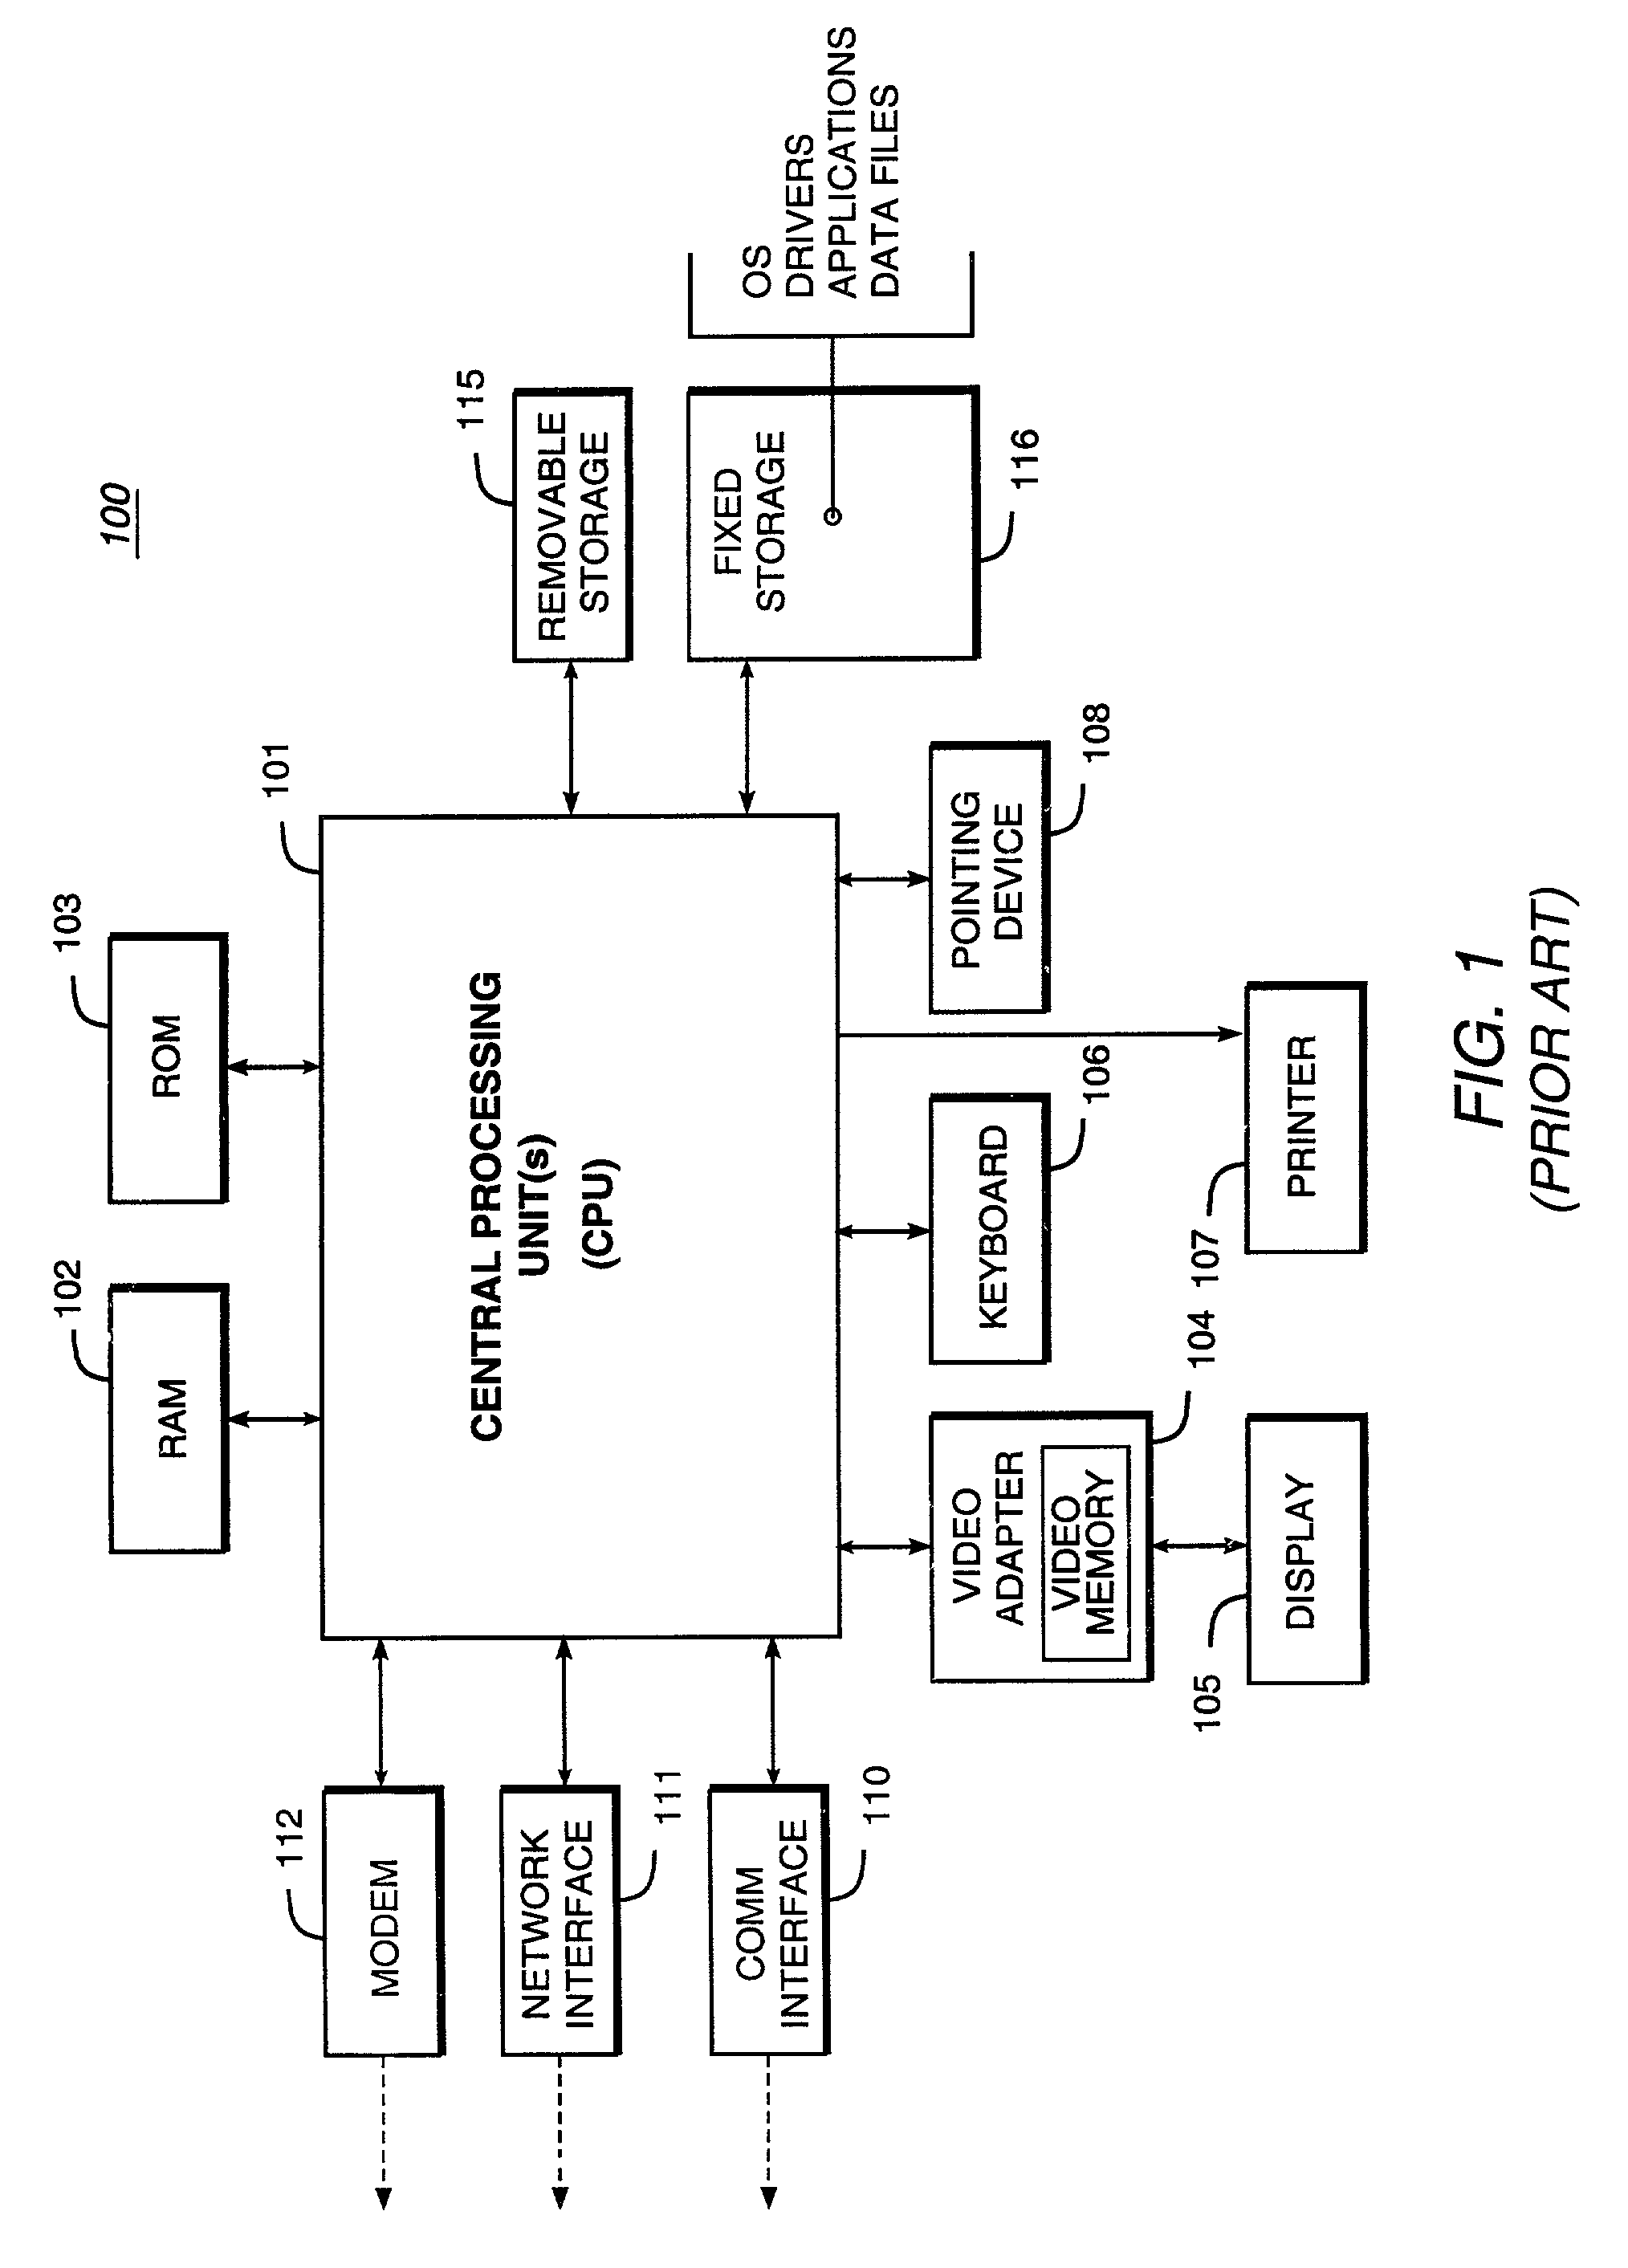 Transaction processing system providing improved methodology for two-phase commit decision